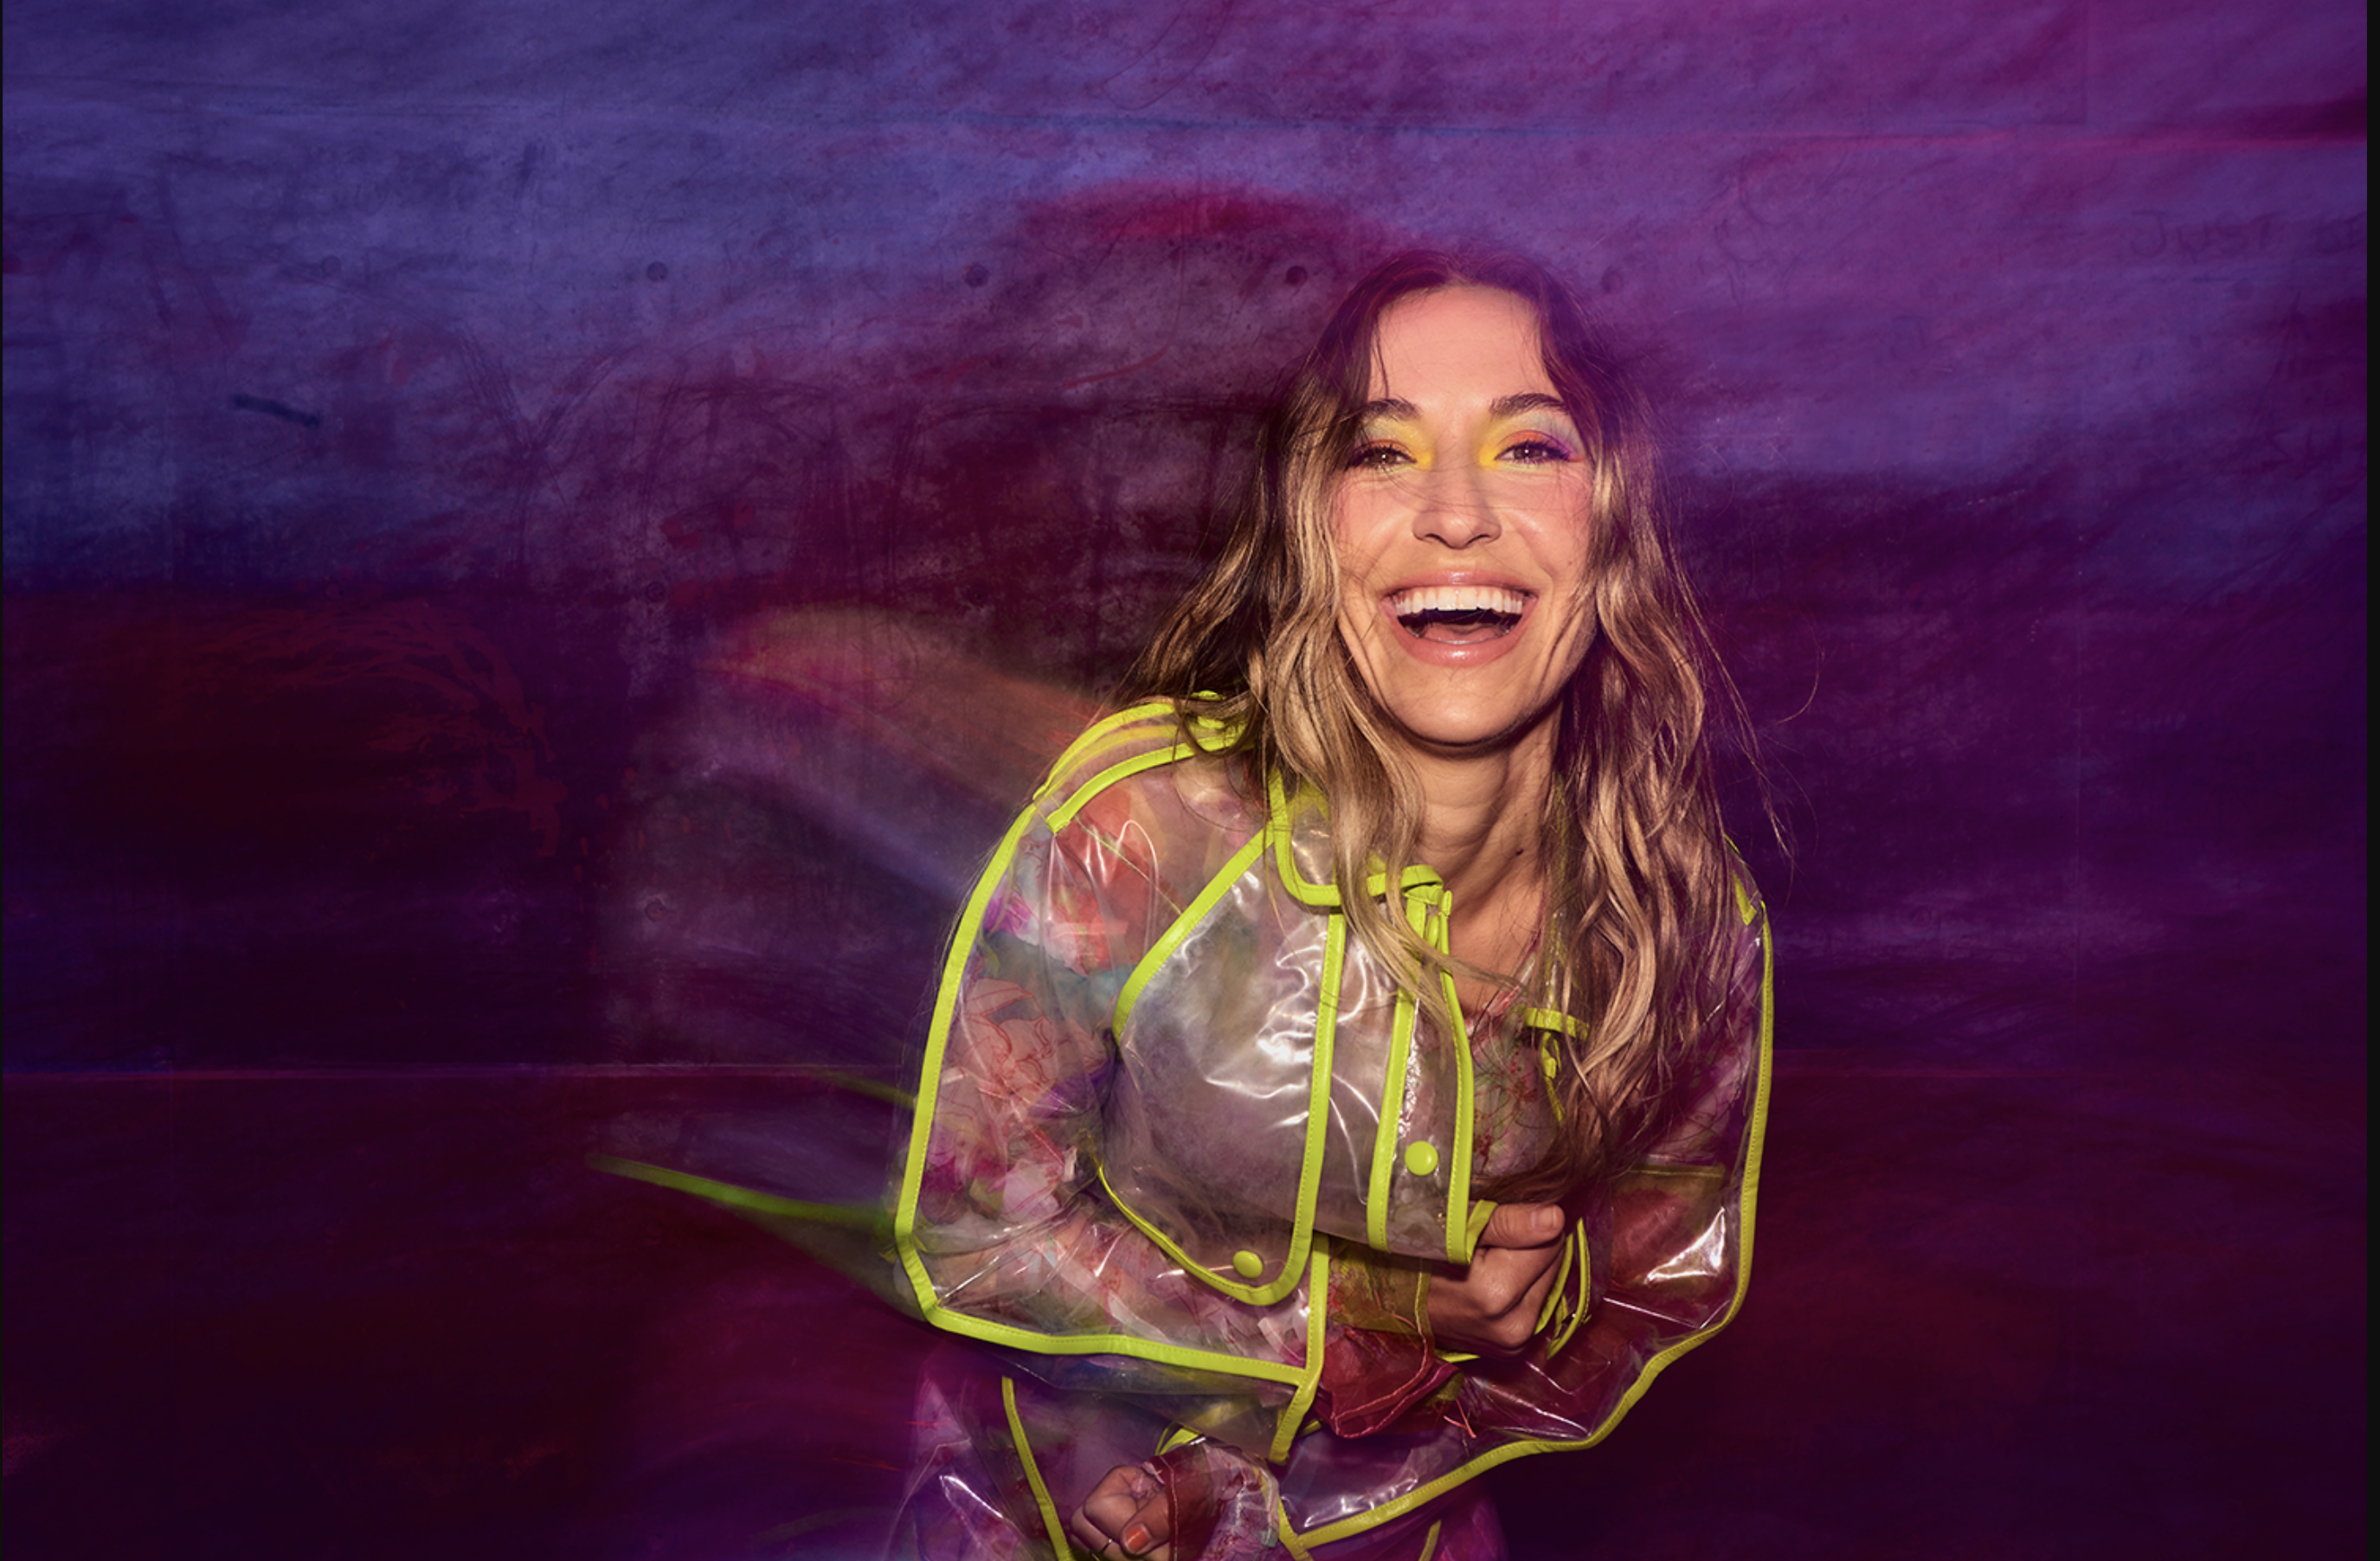 ‘Modern vocal powerhouse, Lauren Daigle stuns with new music releases